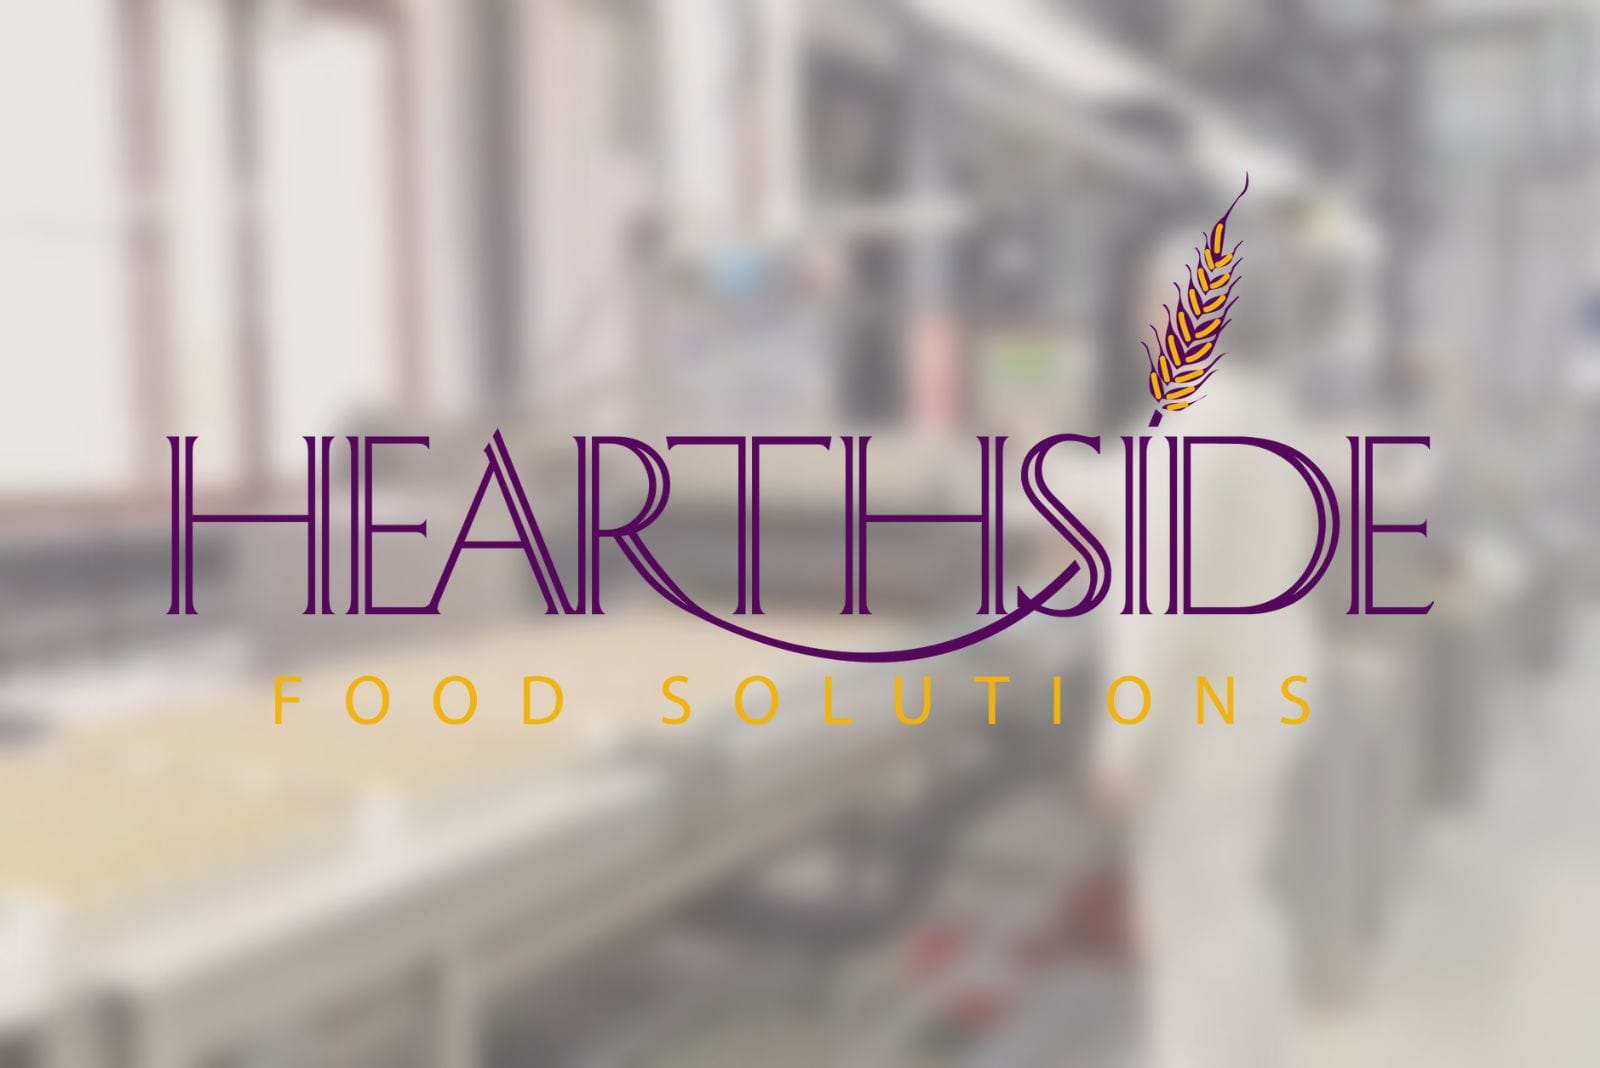 the words hearthside food solutions overlayed on food manufacturing plant line